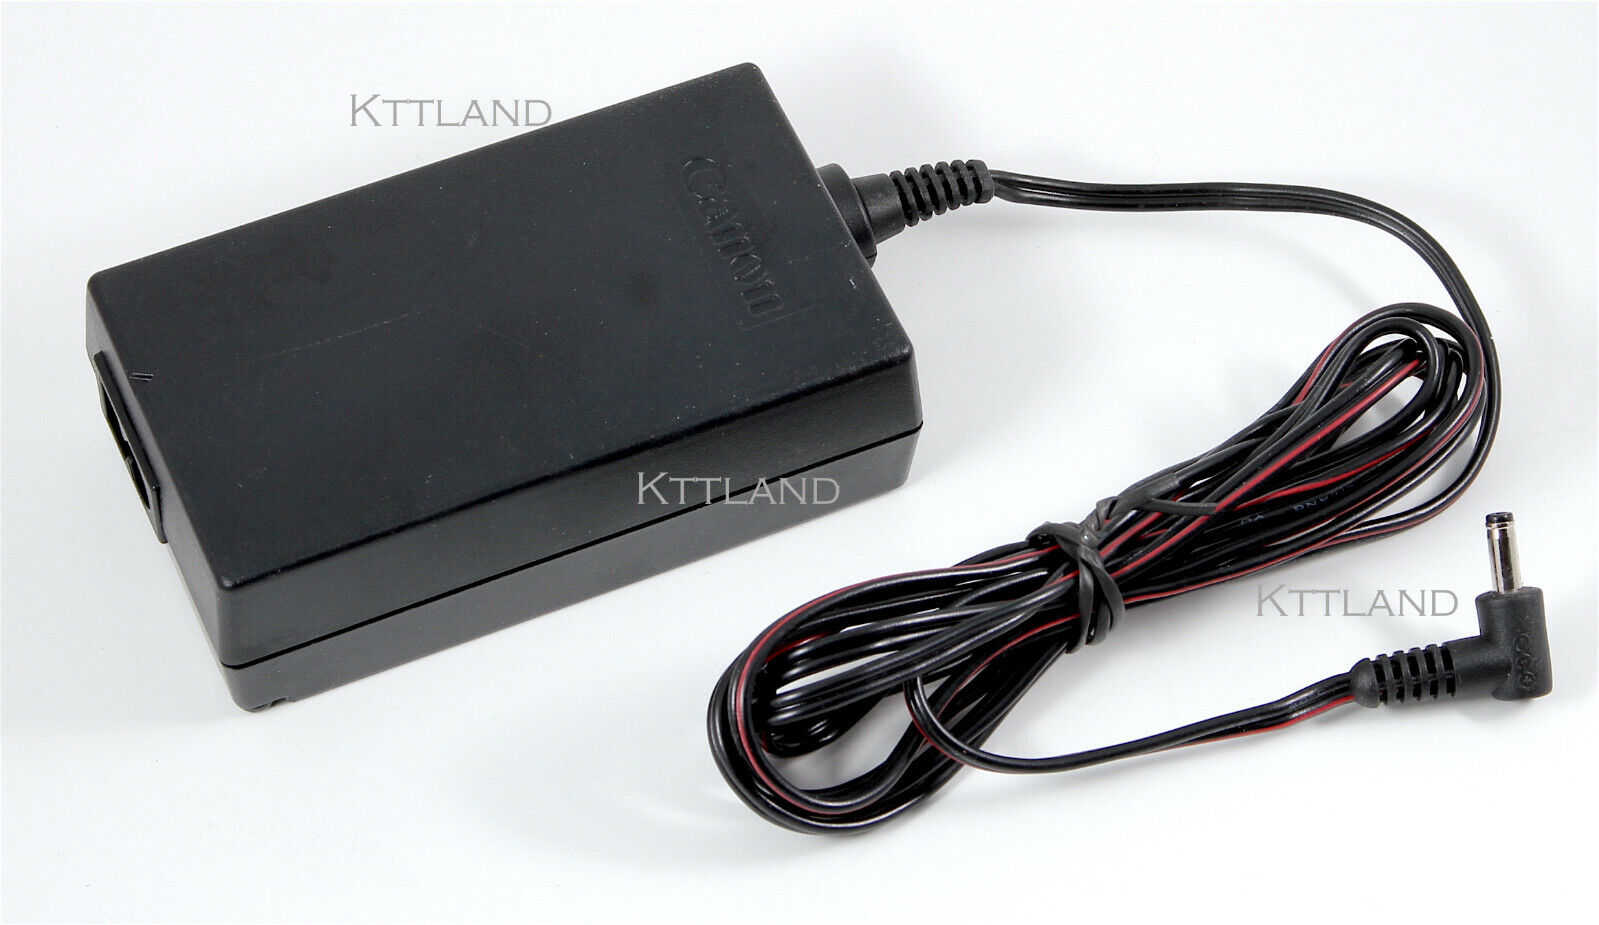 Genuine Canon CA-570 AC Adapter power supply 8.4V @1.5A M306 M307 HF S200 300D